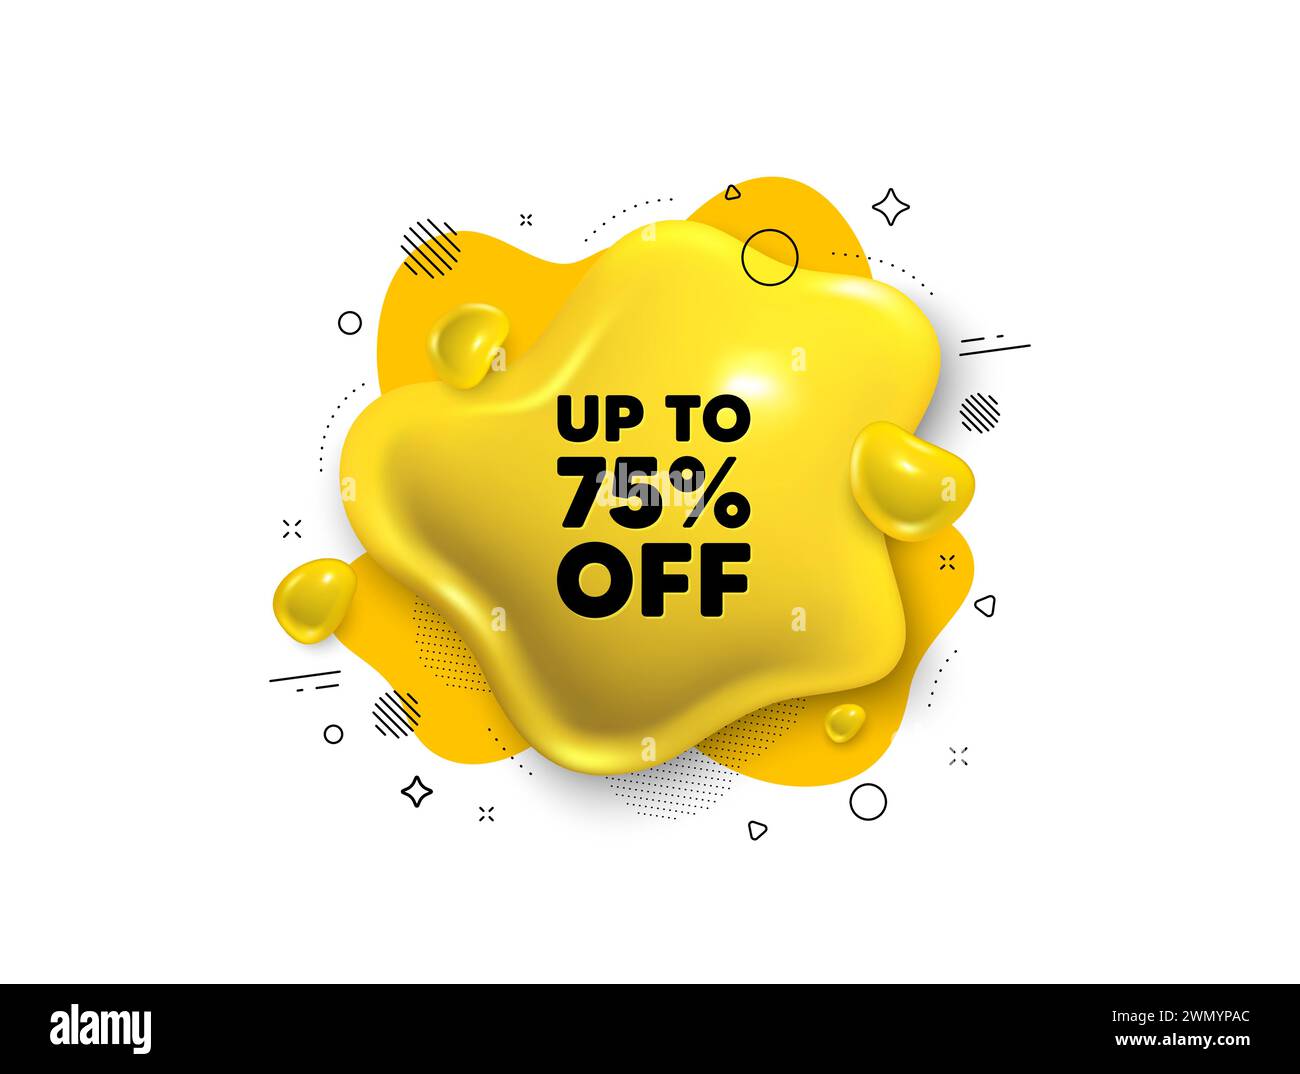 Up to 75 percent off sale. Discount offer price sign. Abstract liquid 3d shape. Vector Stock Vector